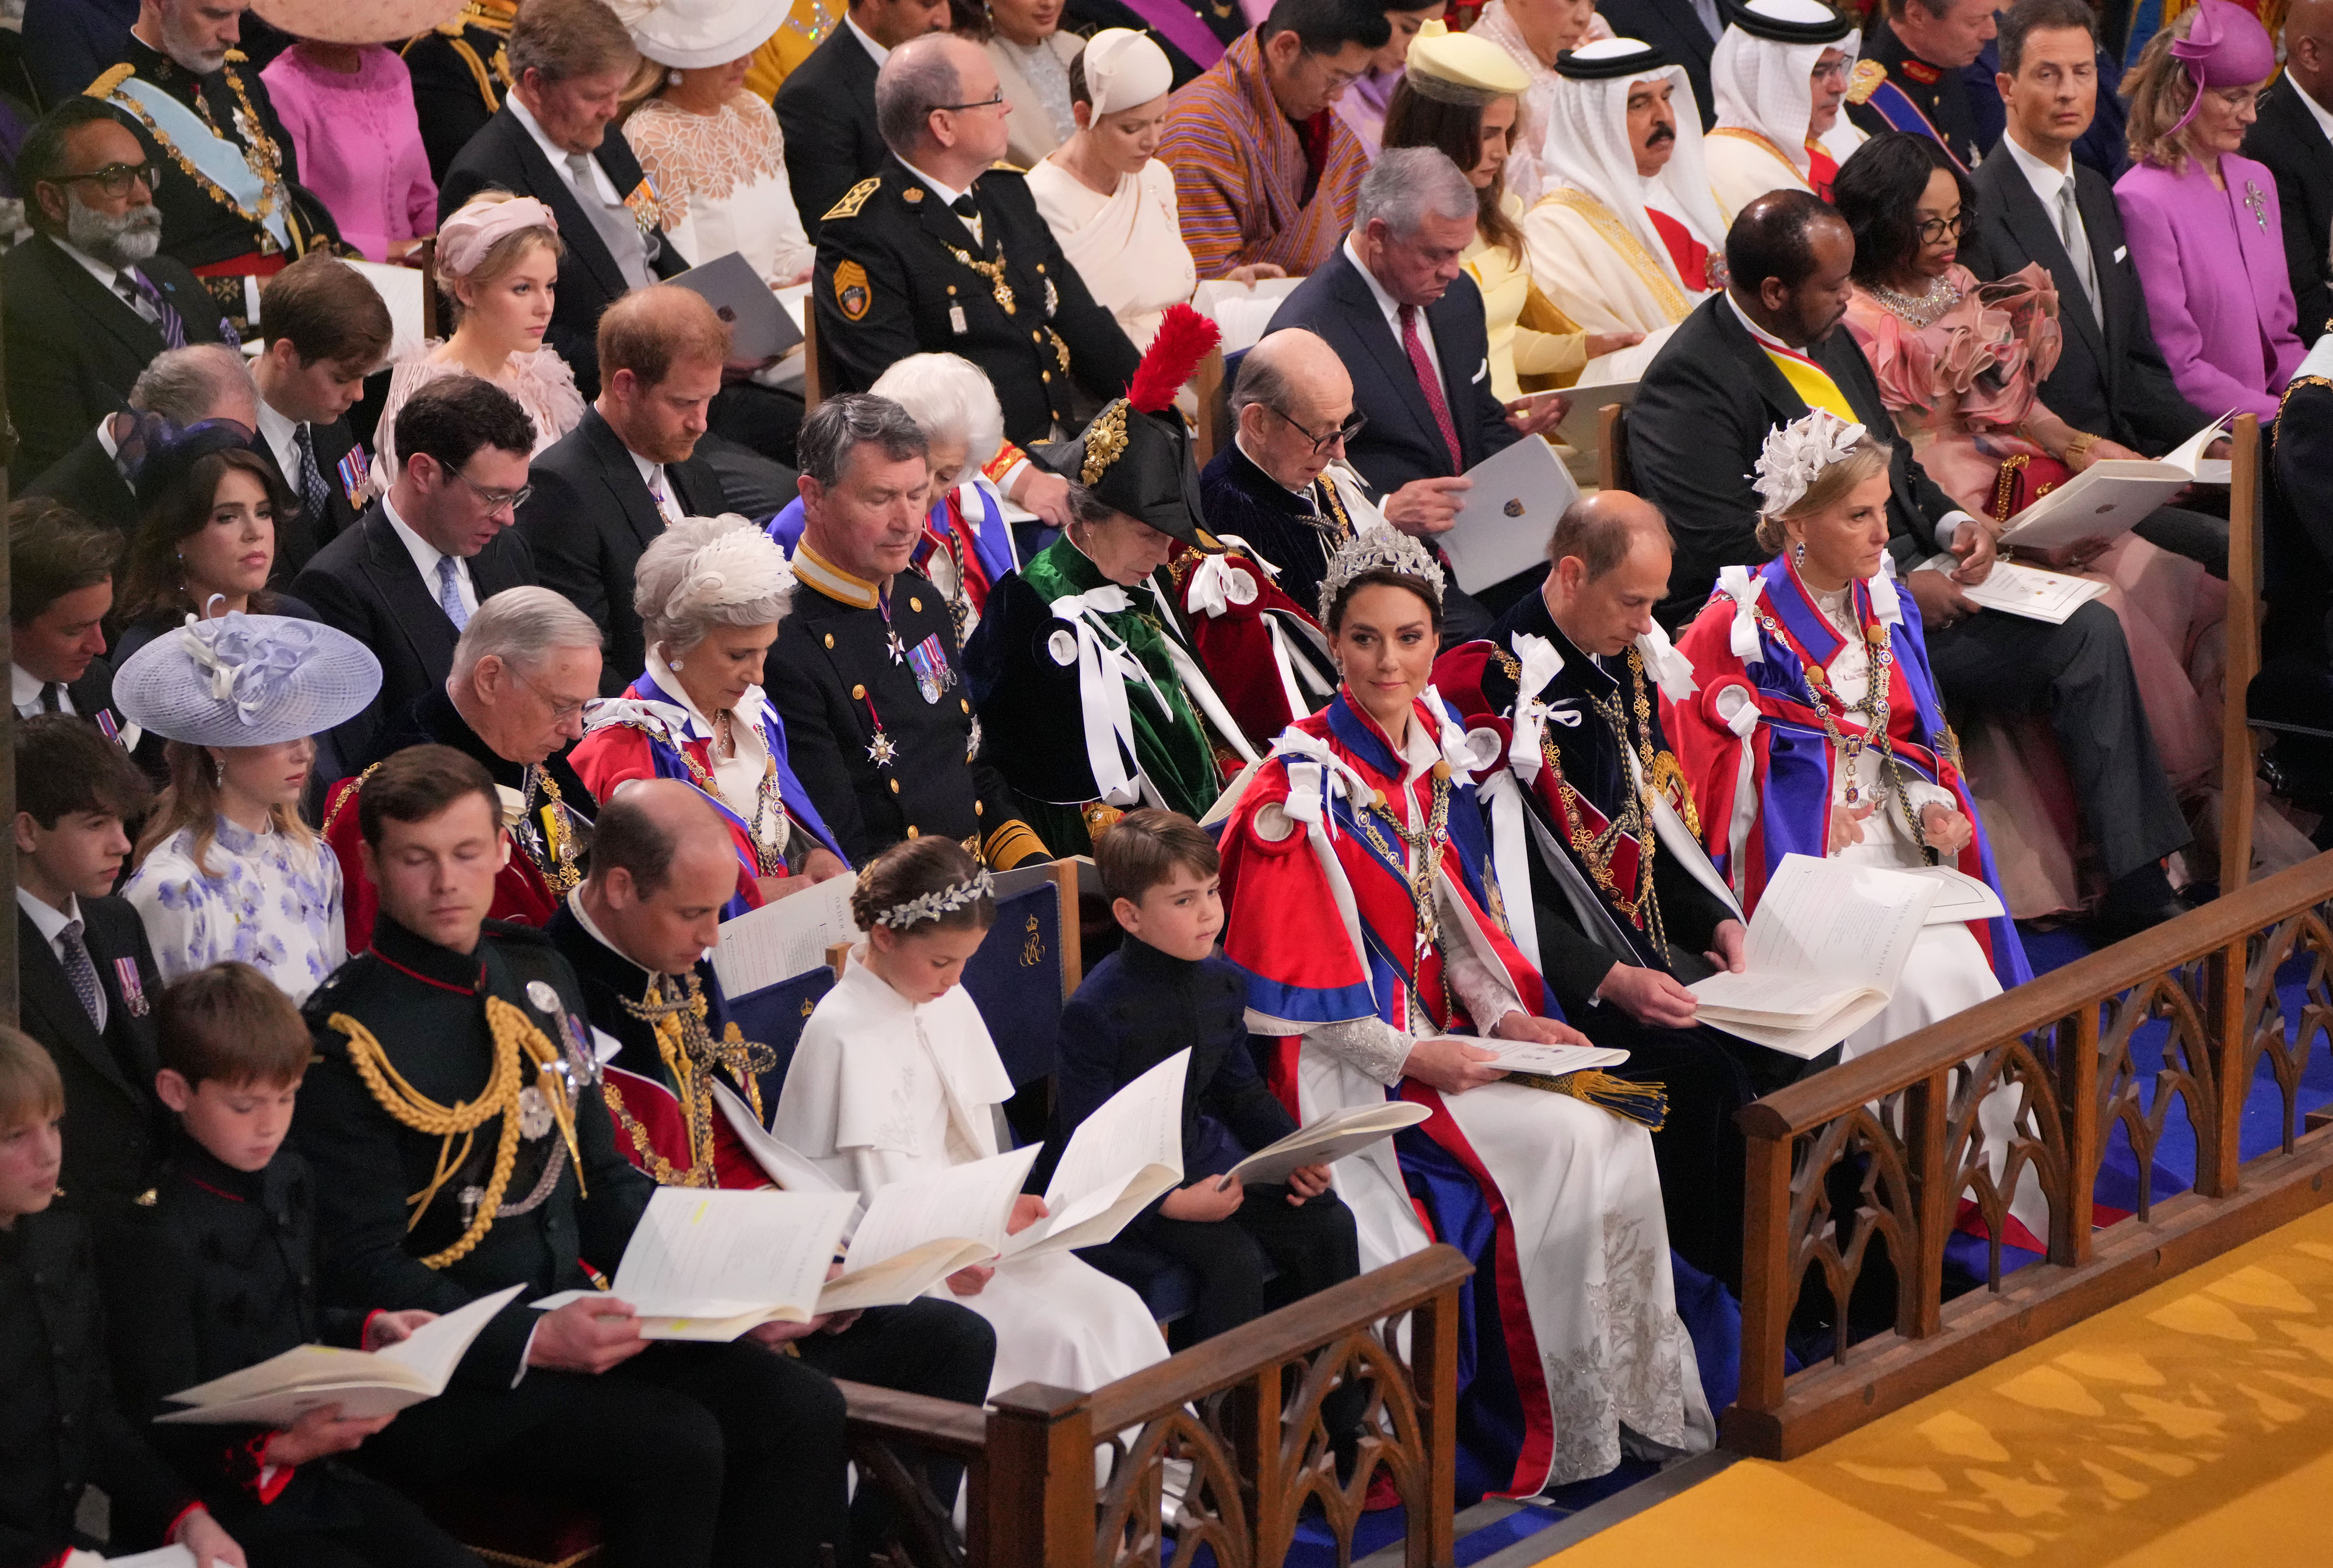 Prince William, Princess Charlotte, Prince Louis, Princess Catherine, Prince Edward and Sophie, the Duchess of Edinburgh with Prince Harry (3rd row 4th right) at the coronation ceremony of King Charles III and Queen Camilla on May 6, 2023 in London, England | Source: Getty Images